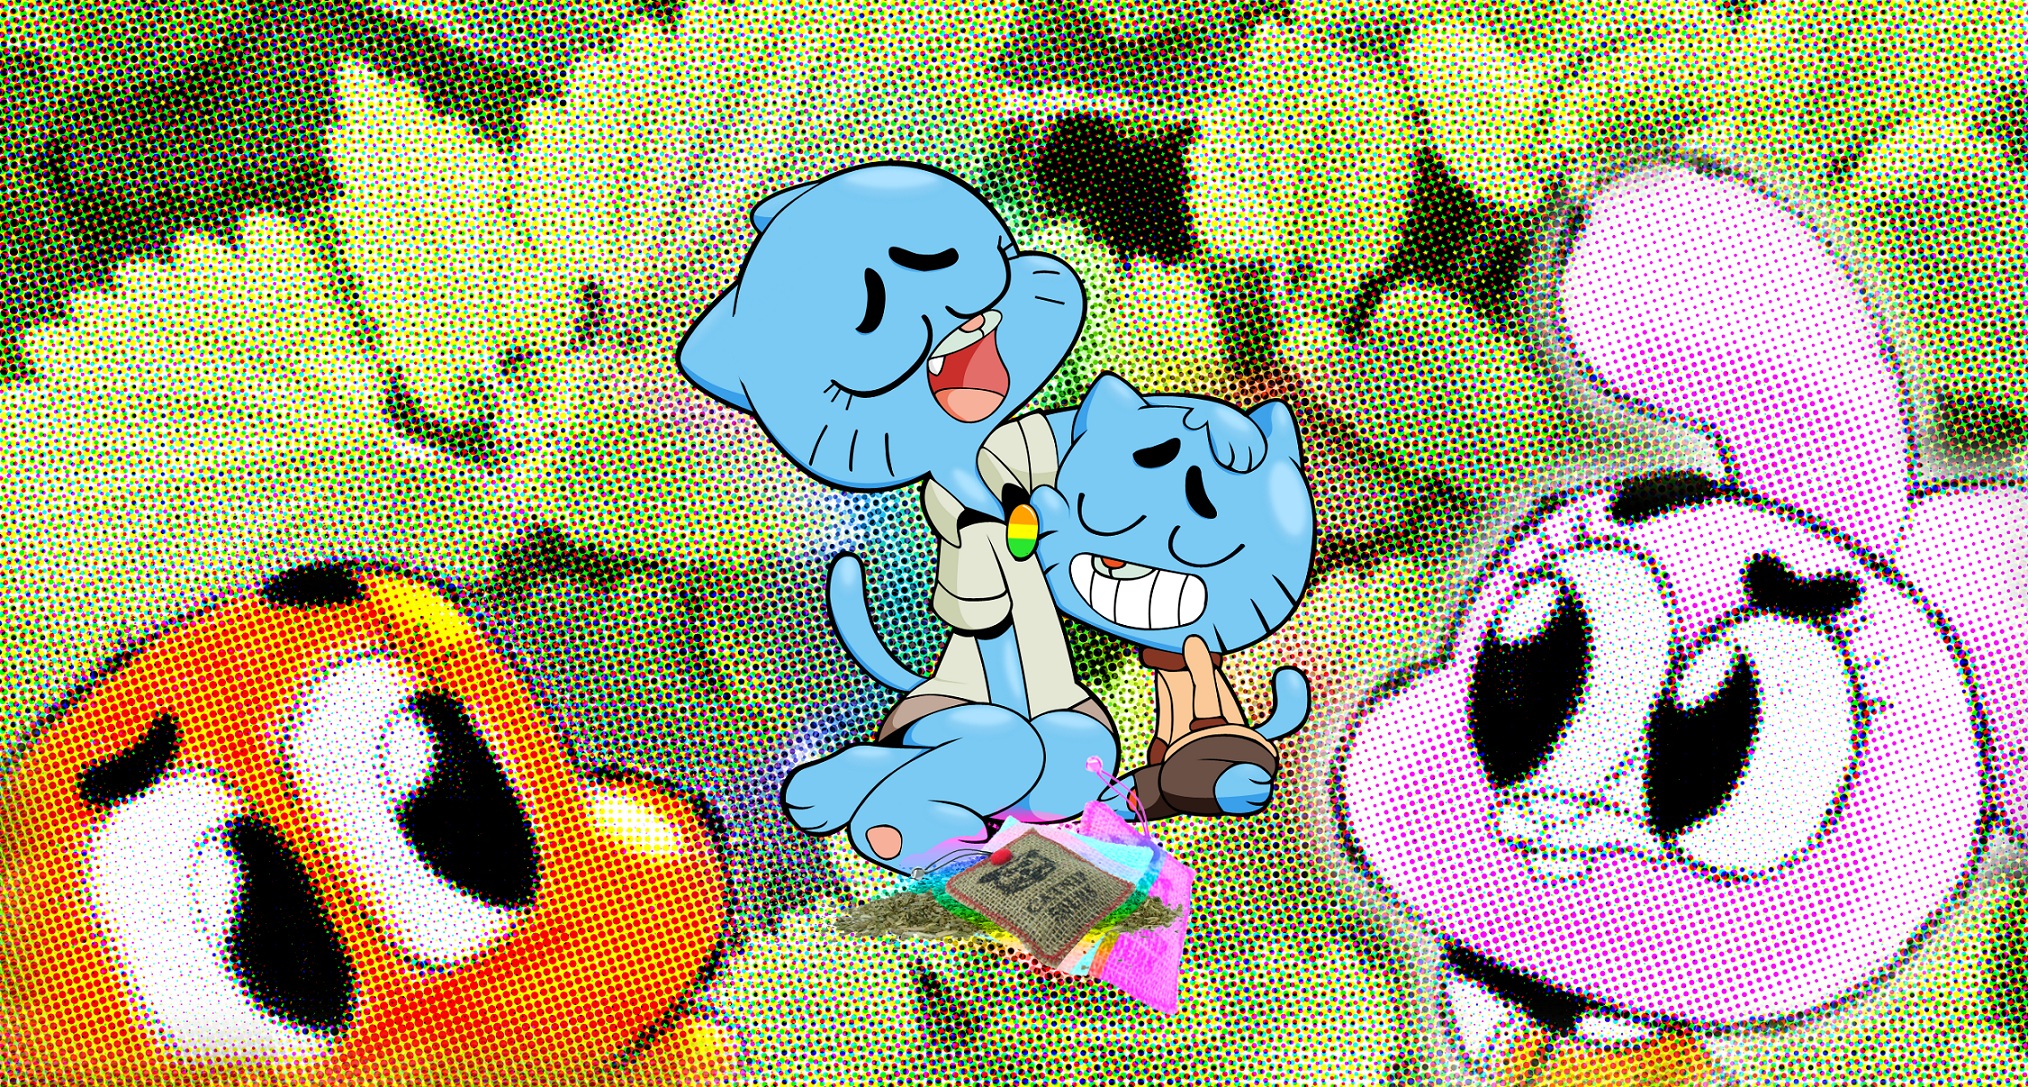 Is there catnip in Gumball's world? 